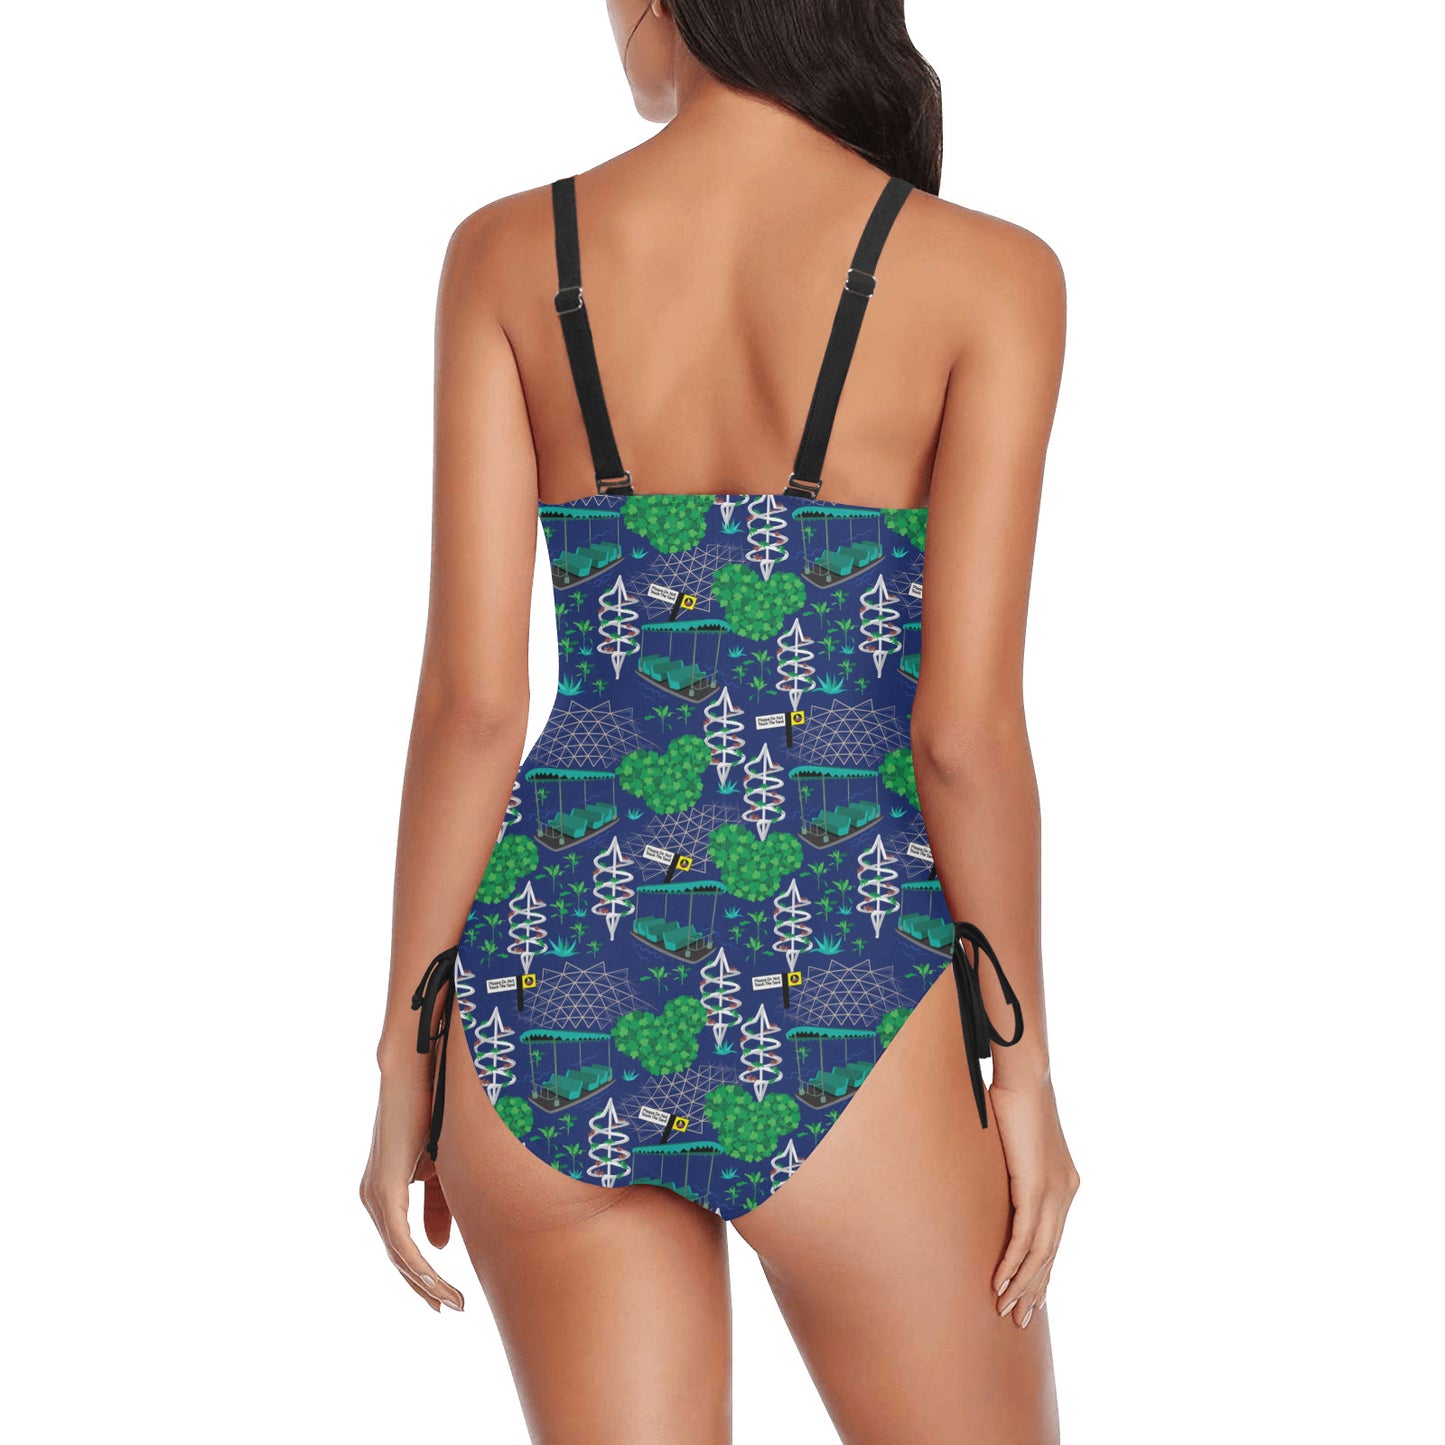 Living With The Land Drawstring Side Women's One-Piece Swimsuit